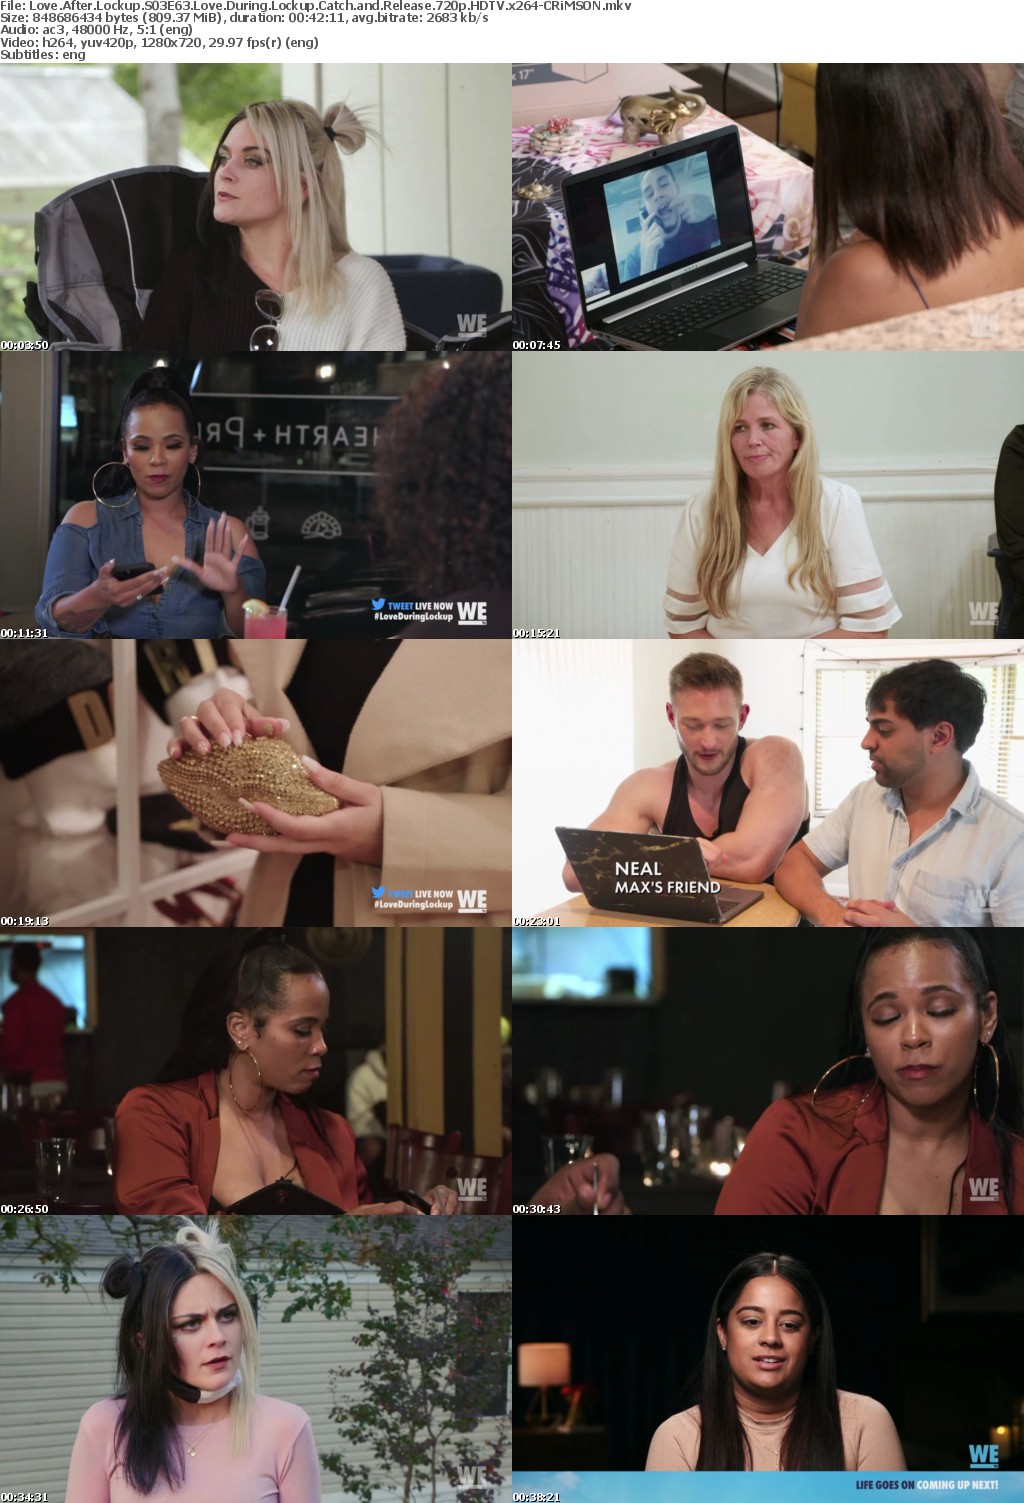 Love After Lockup S03E63 Love During Lockup Catch and Release 720p HDTV x264-CRiMSON